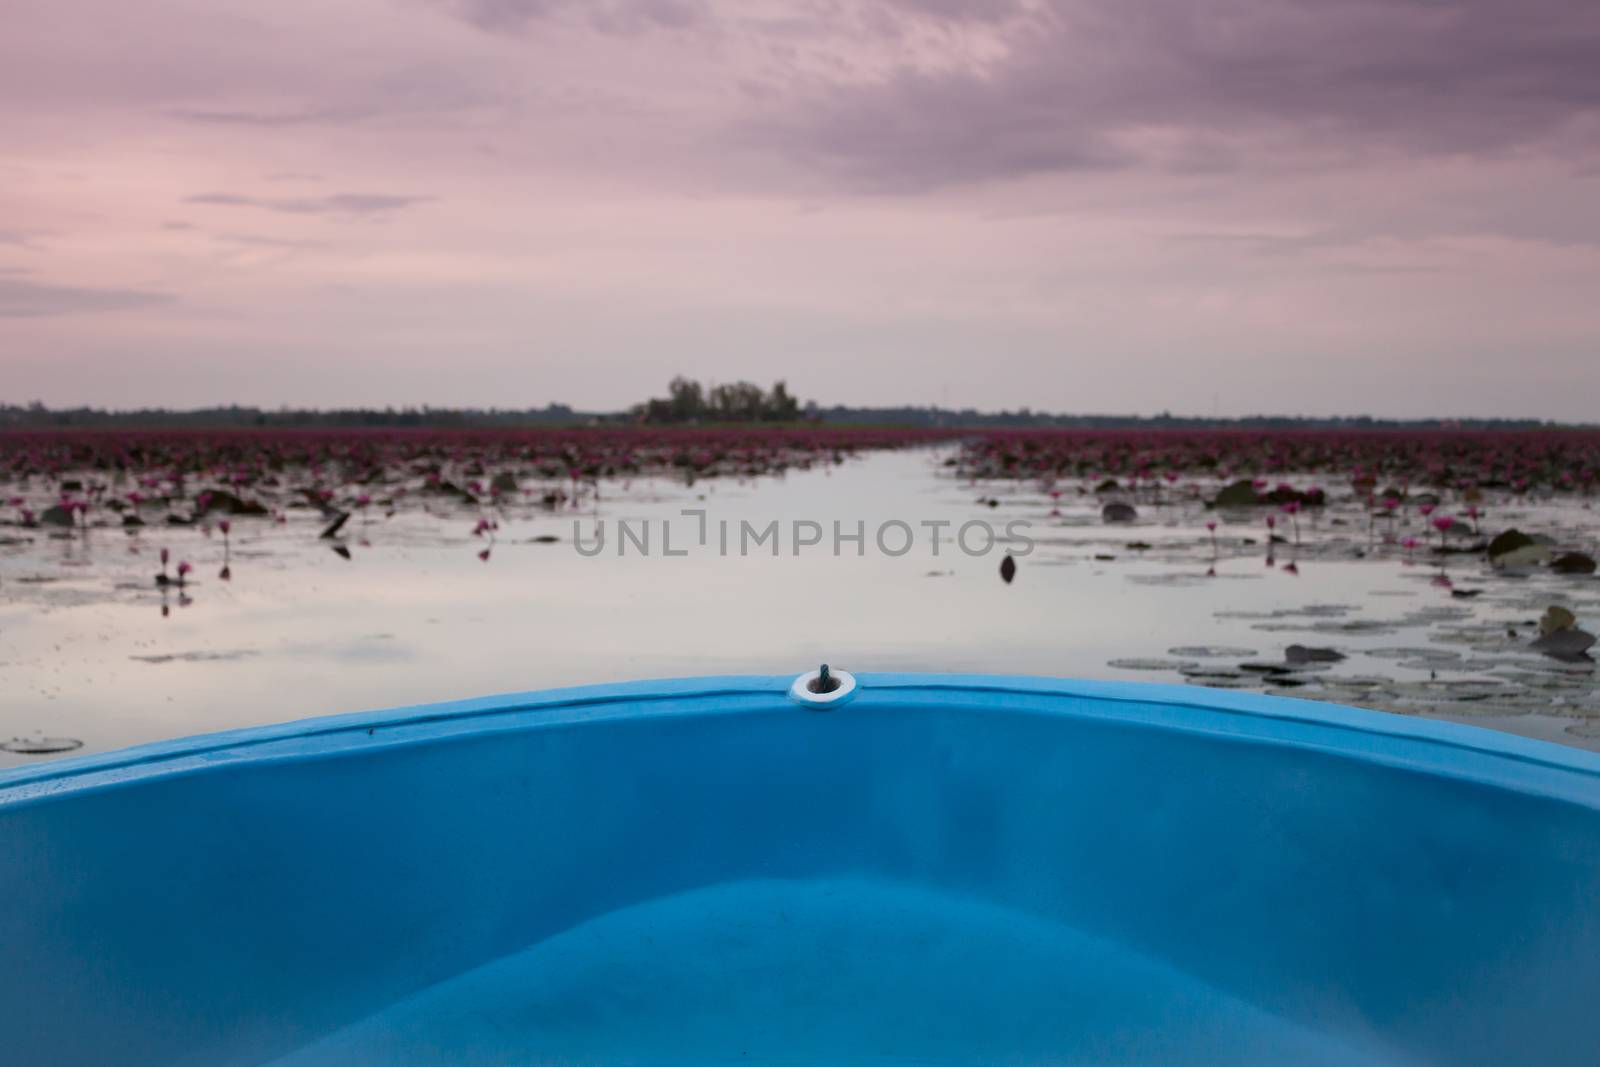 Small boat in the lake of red lotus, stock photo